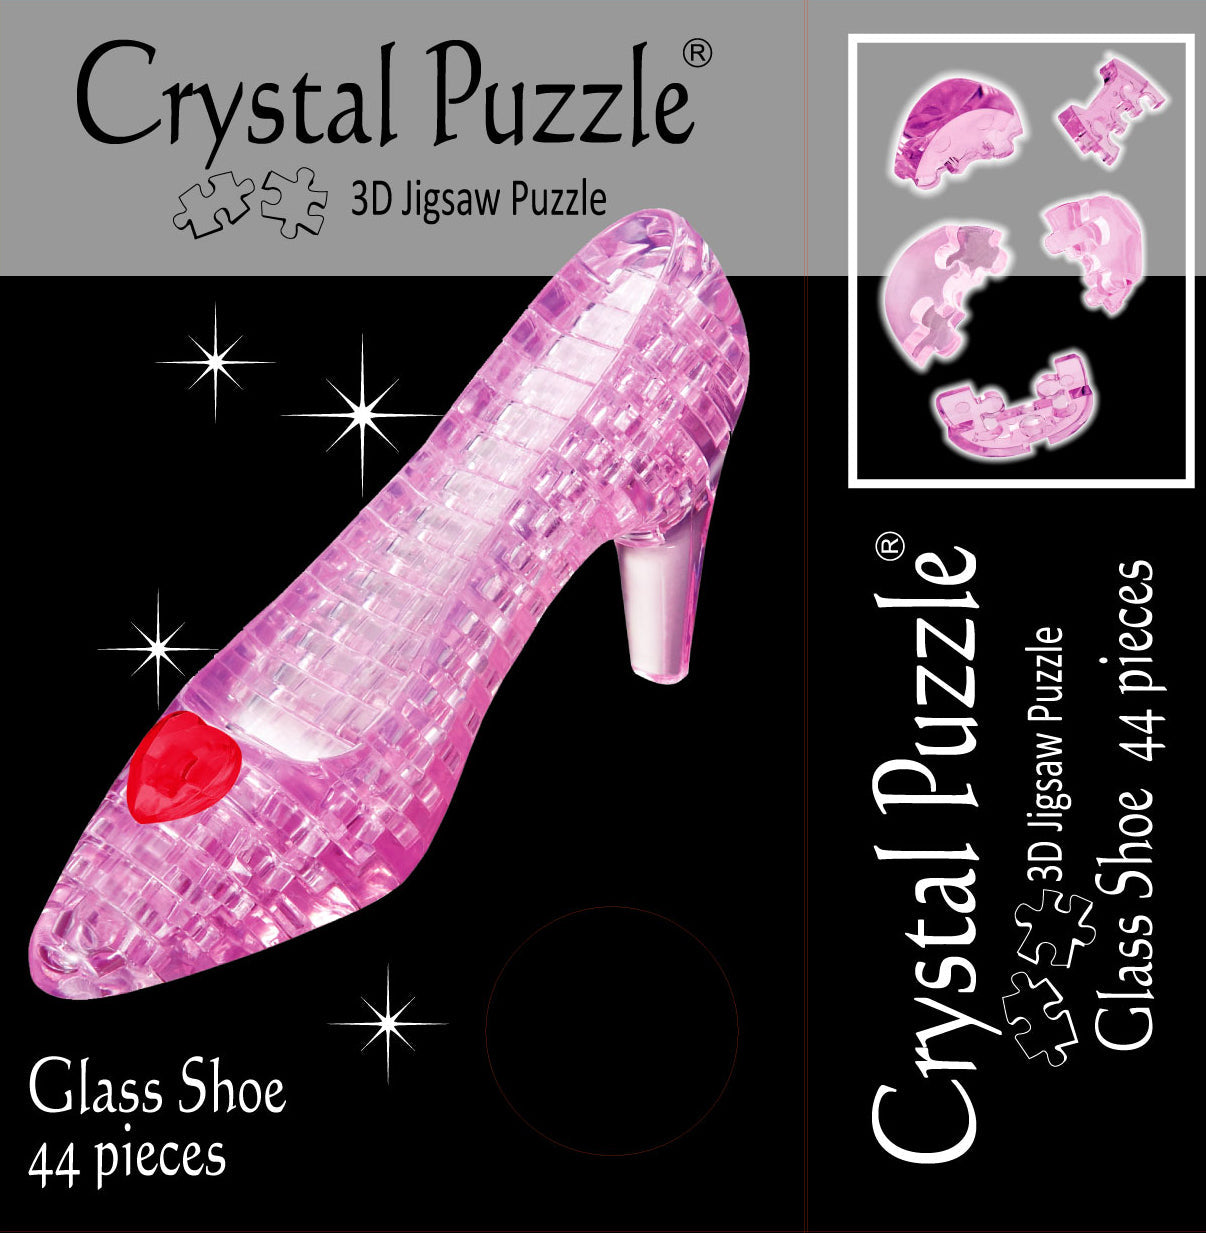 3D Pink Glass Shoe Crystal Puzzle